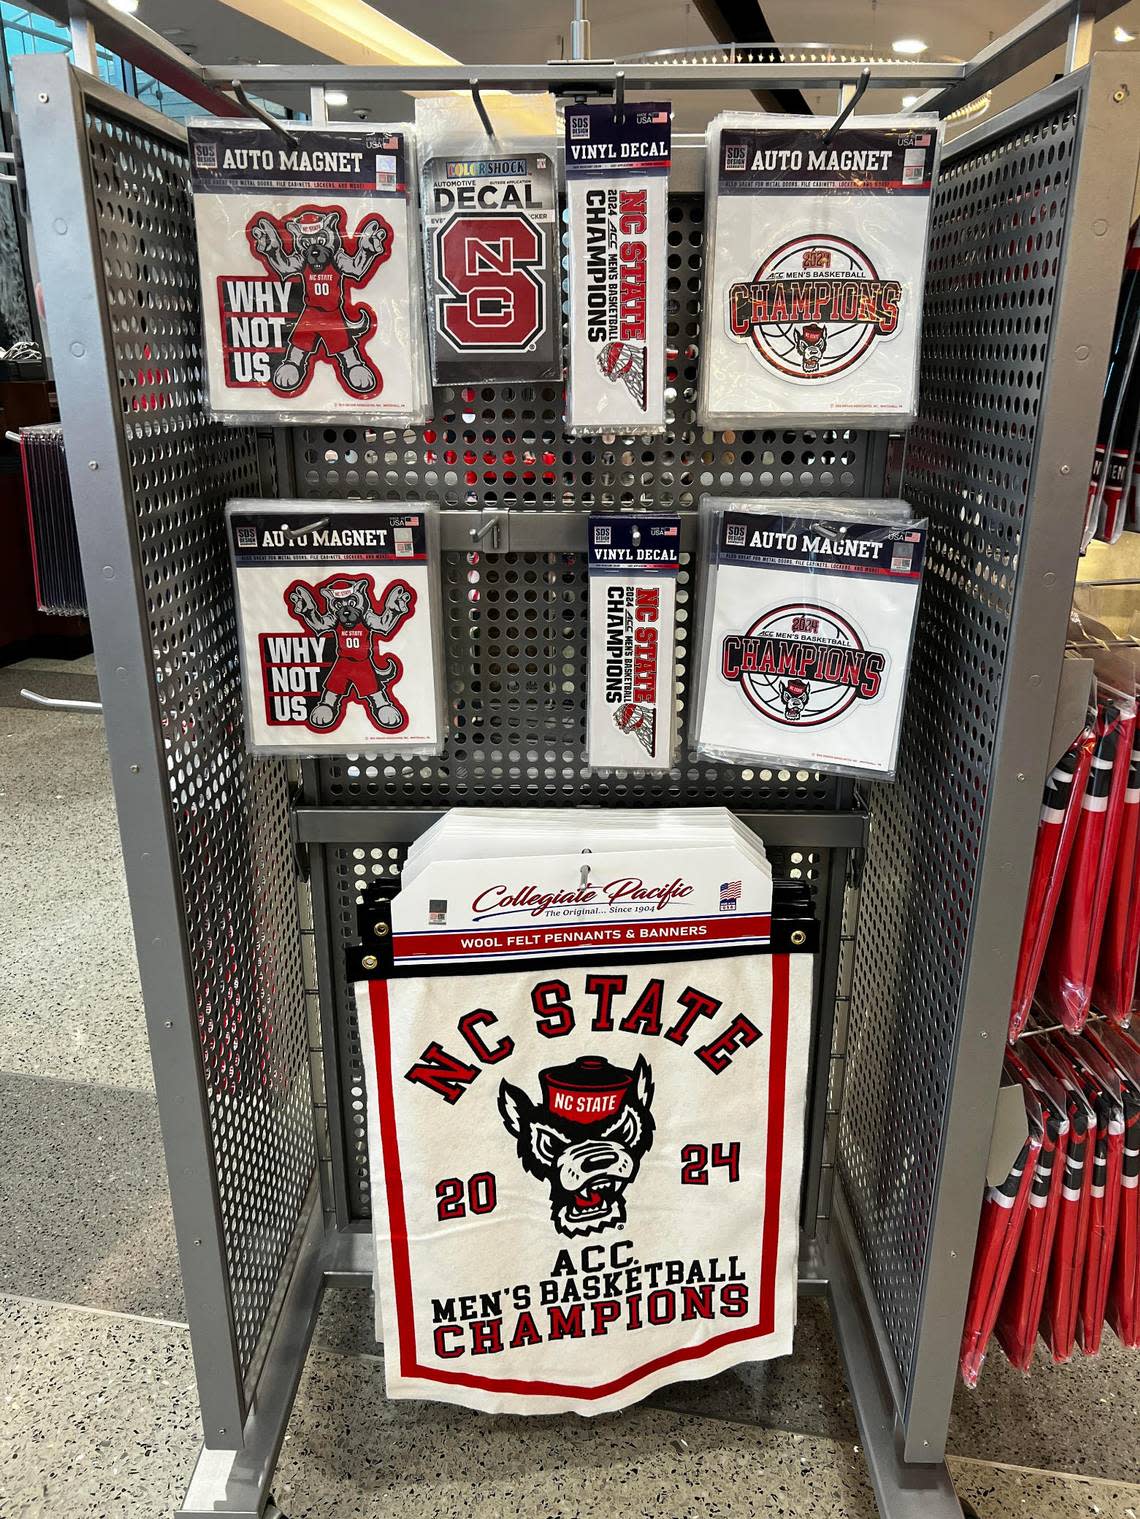 Wolfpack Outfitters stores on the NCSU campus have seen about three times their normal traffic since the school’s basketball teams entered the NCAA tournament. Novelty items and clothing are big sellers. Jennifer Gilmore/N.C. State University